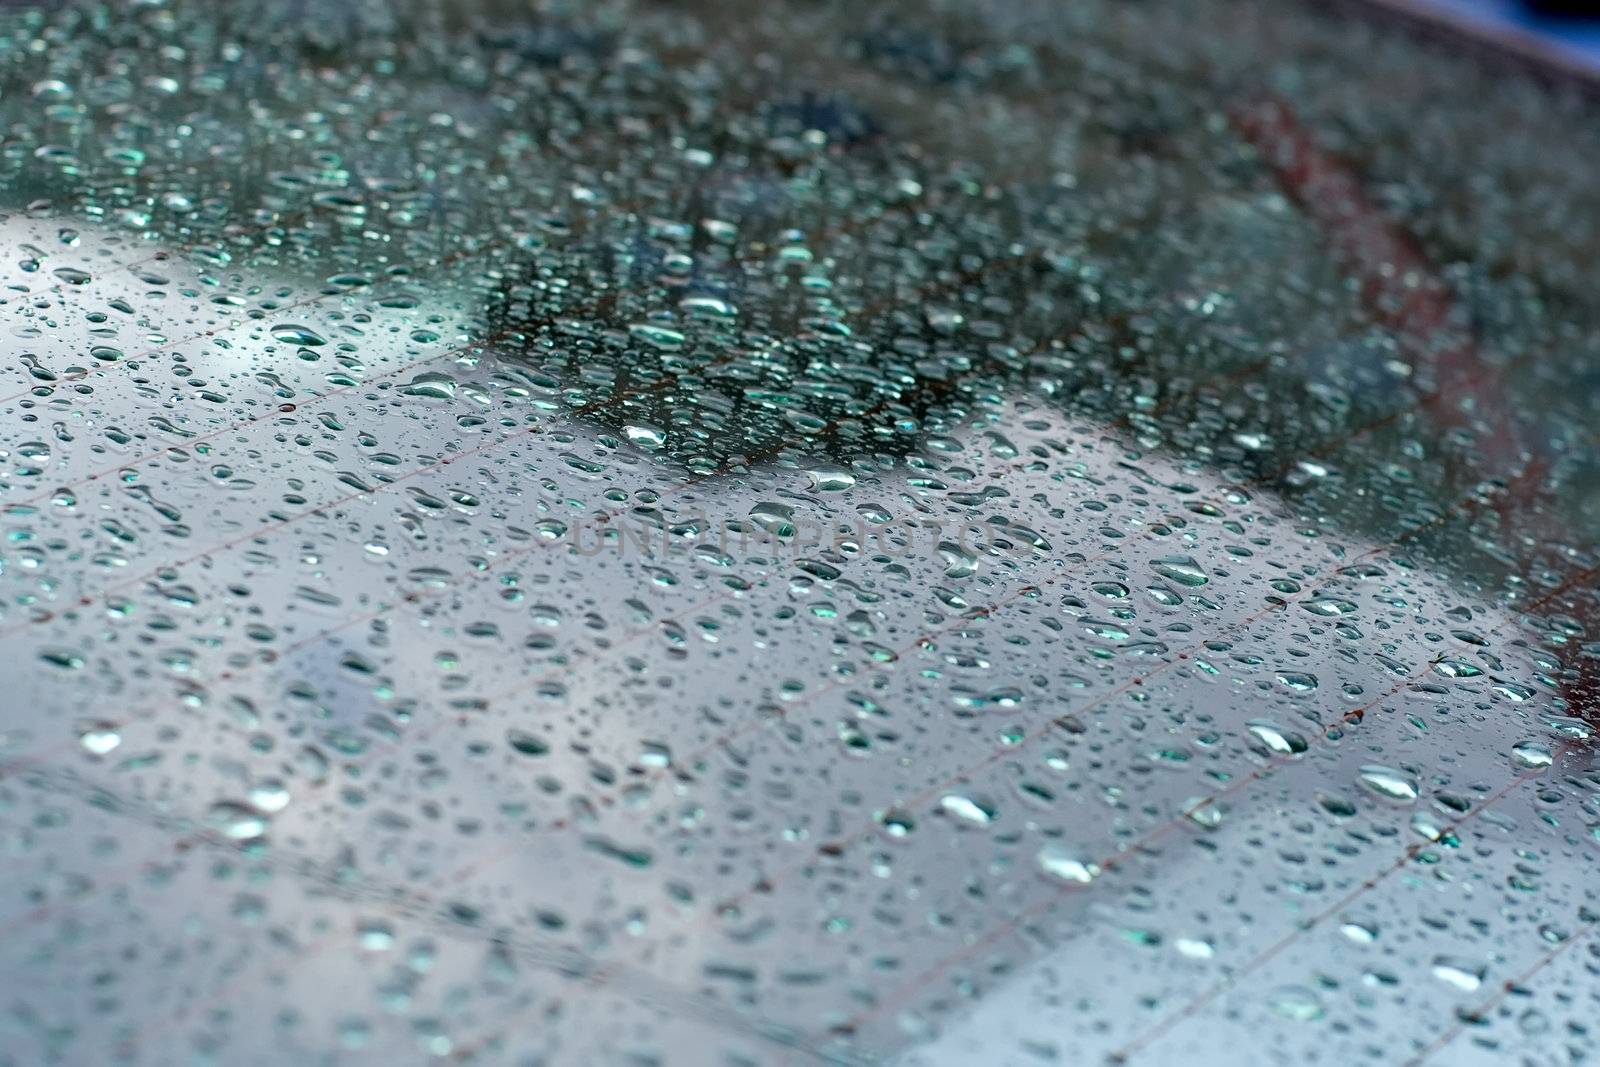 Water Droplets on a Glass Surface. Close-up